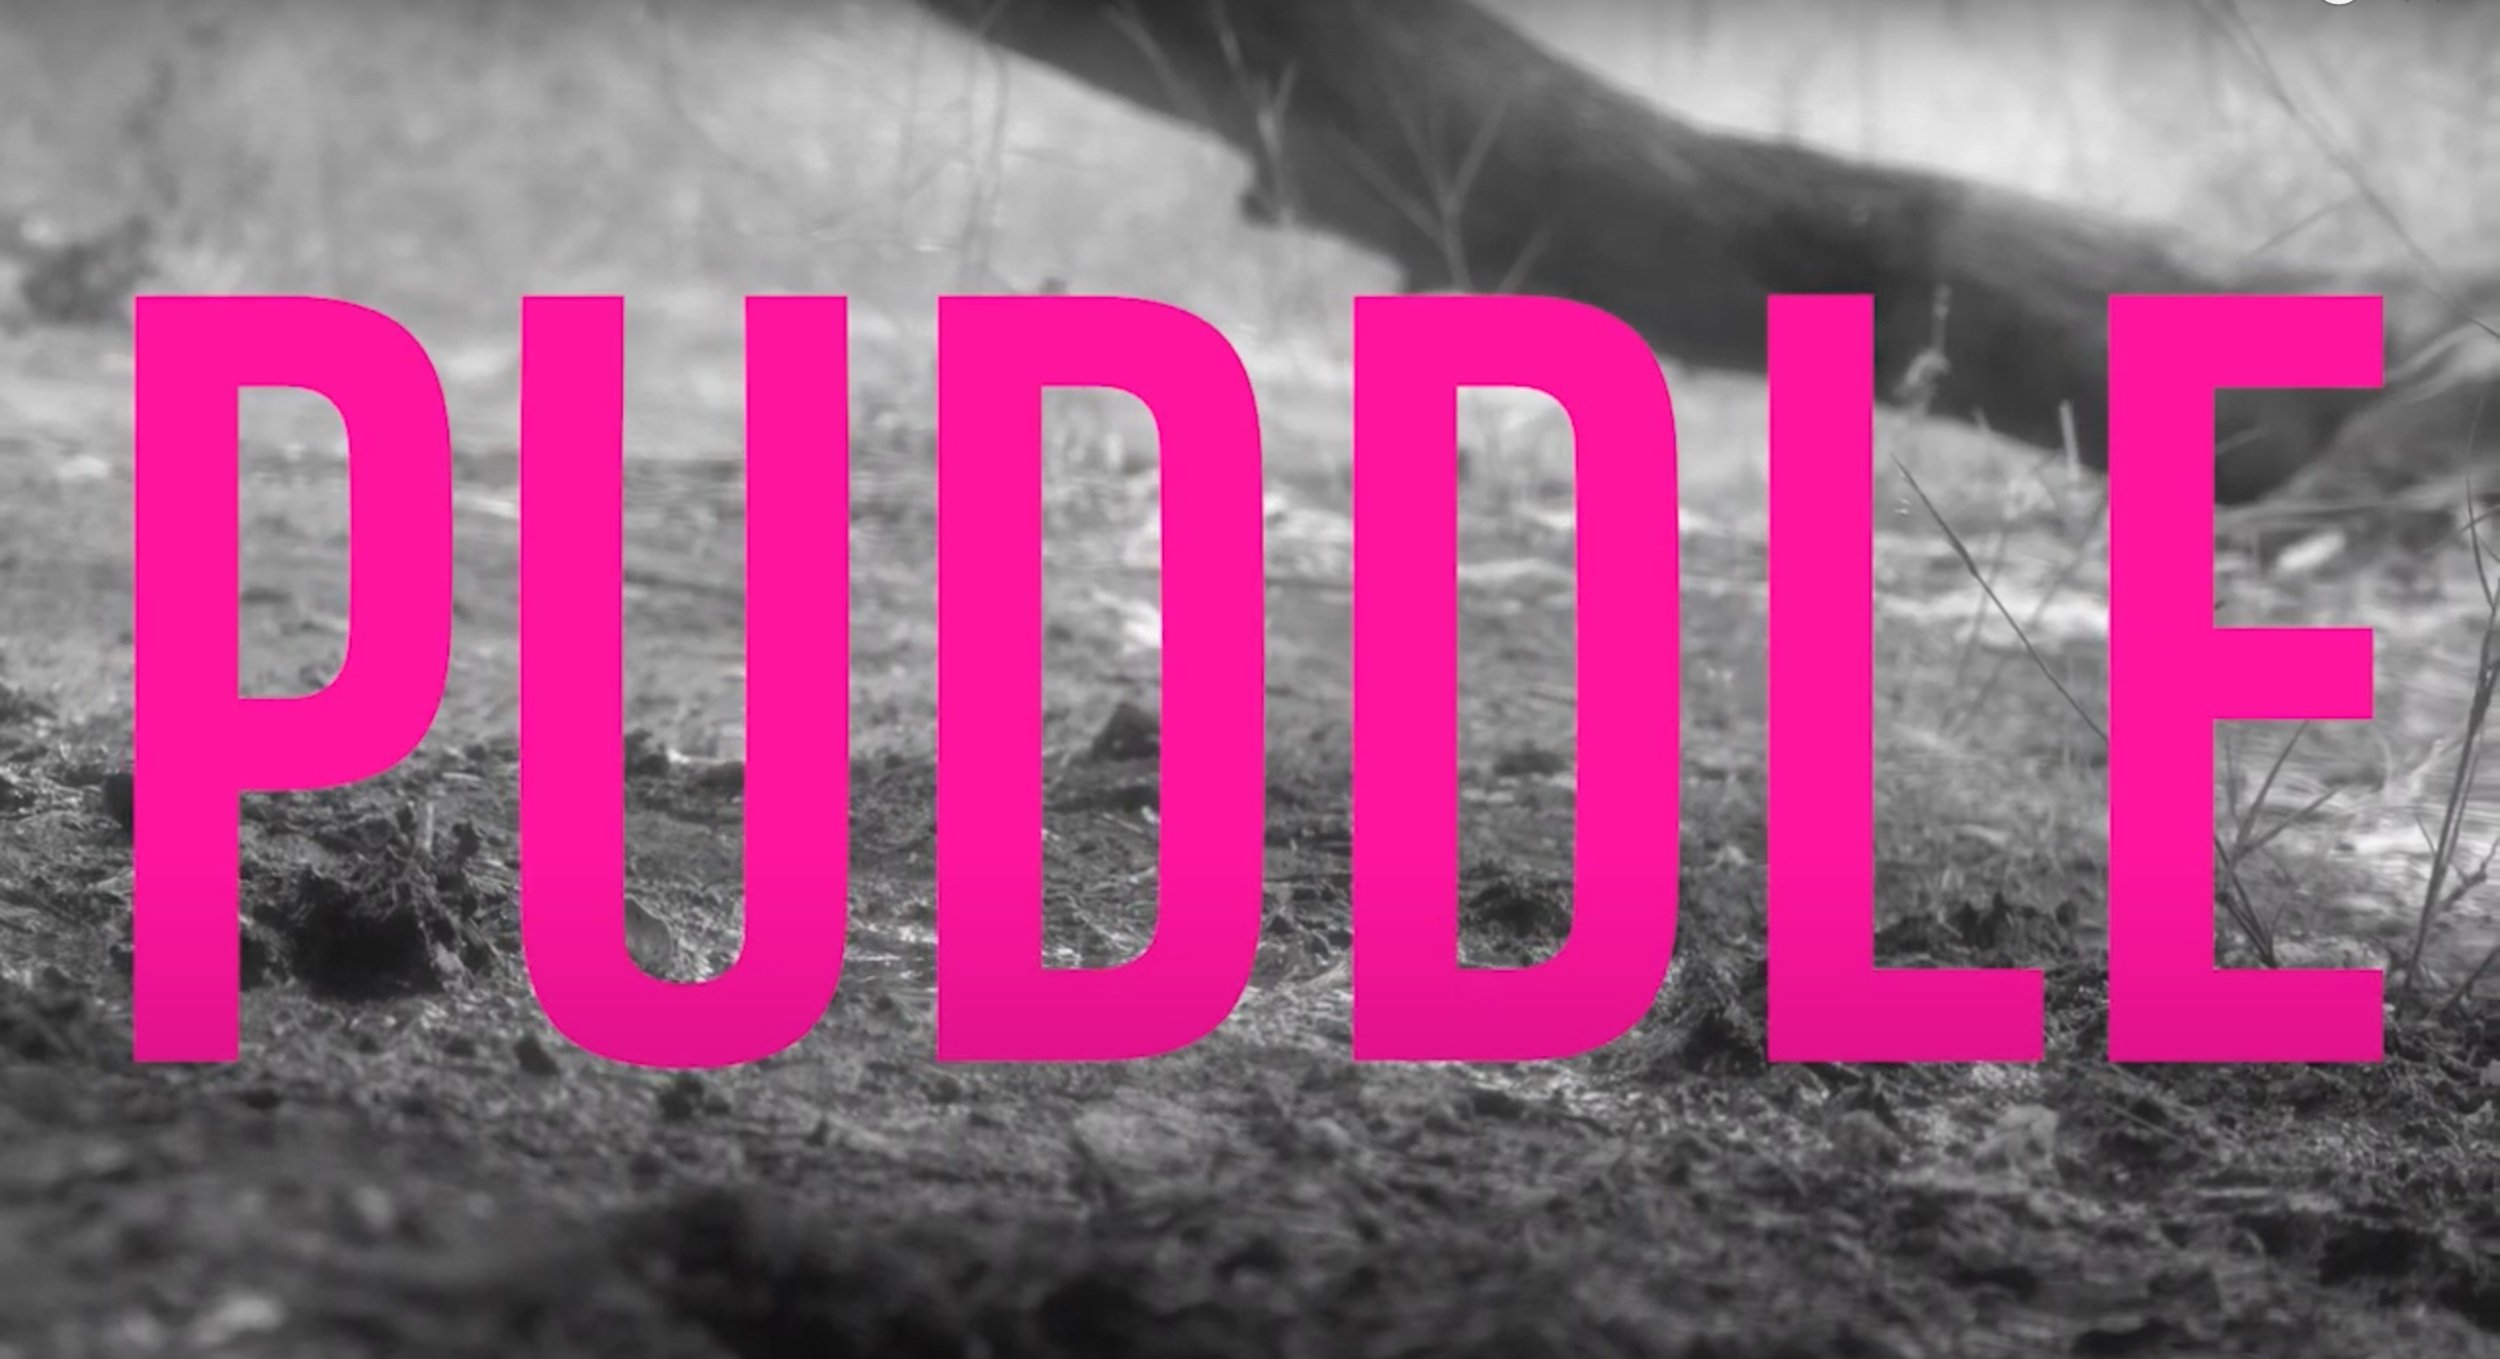 Puddle (Short Film) - Director of Photography